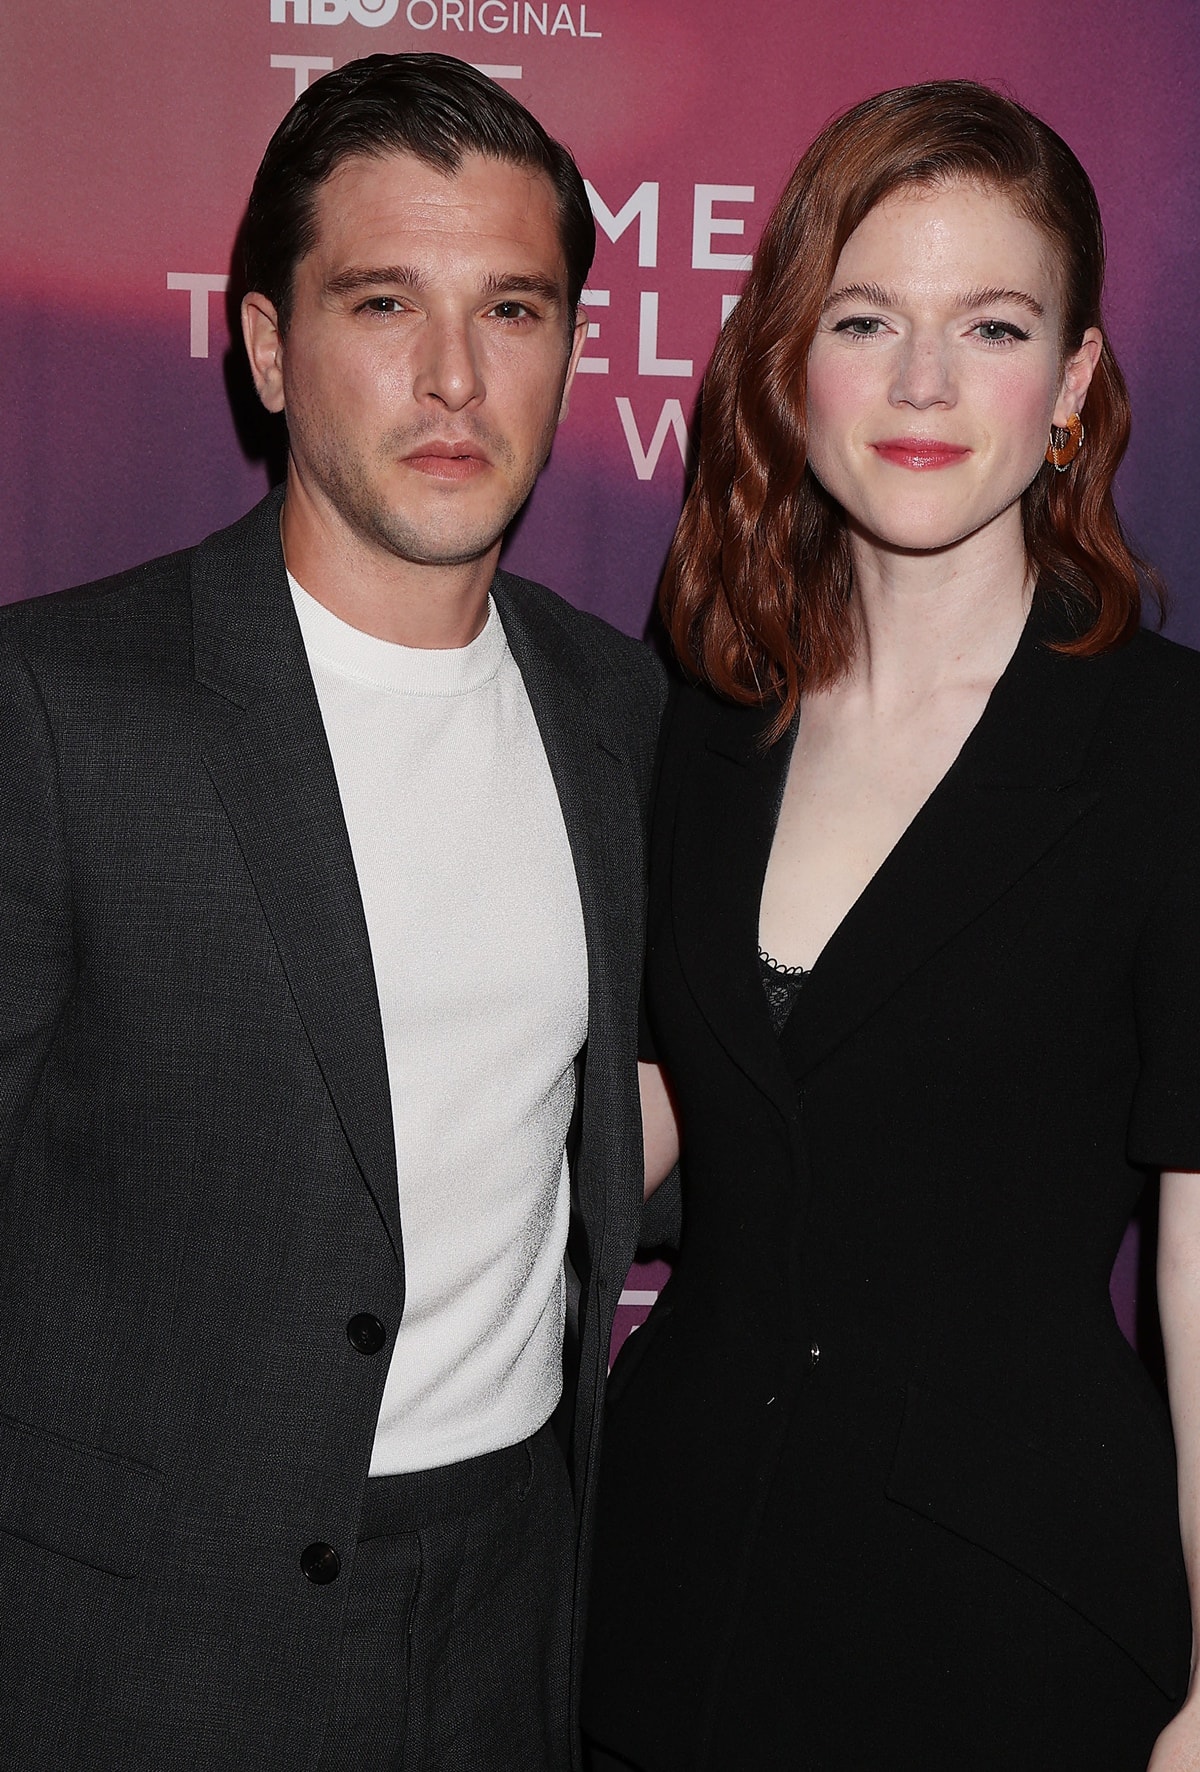 Rose Leslie and her husband Kit Harington attend HBO's "The Time Traveler's Wife" New York Premiere